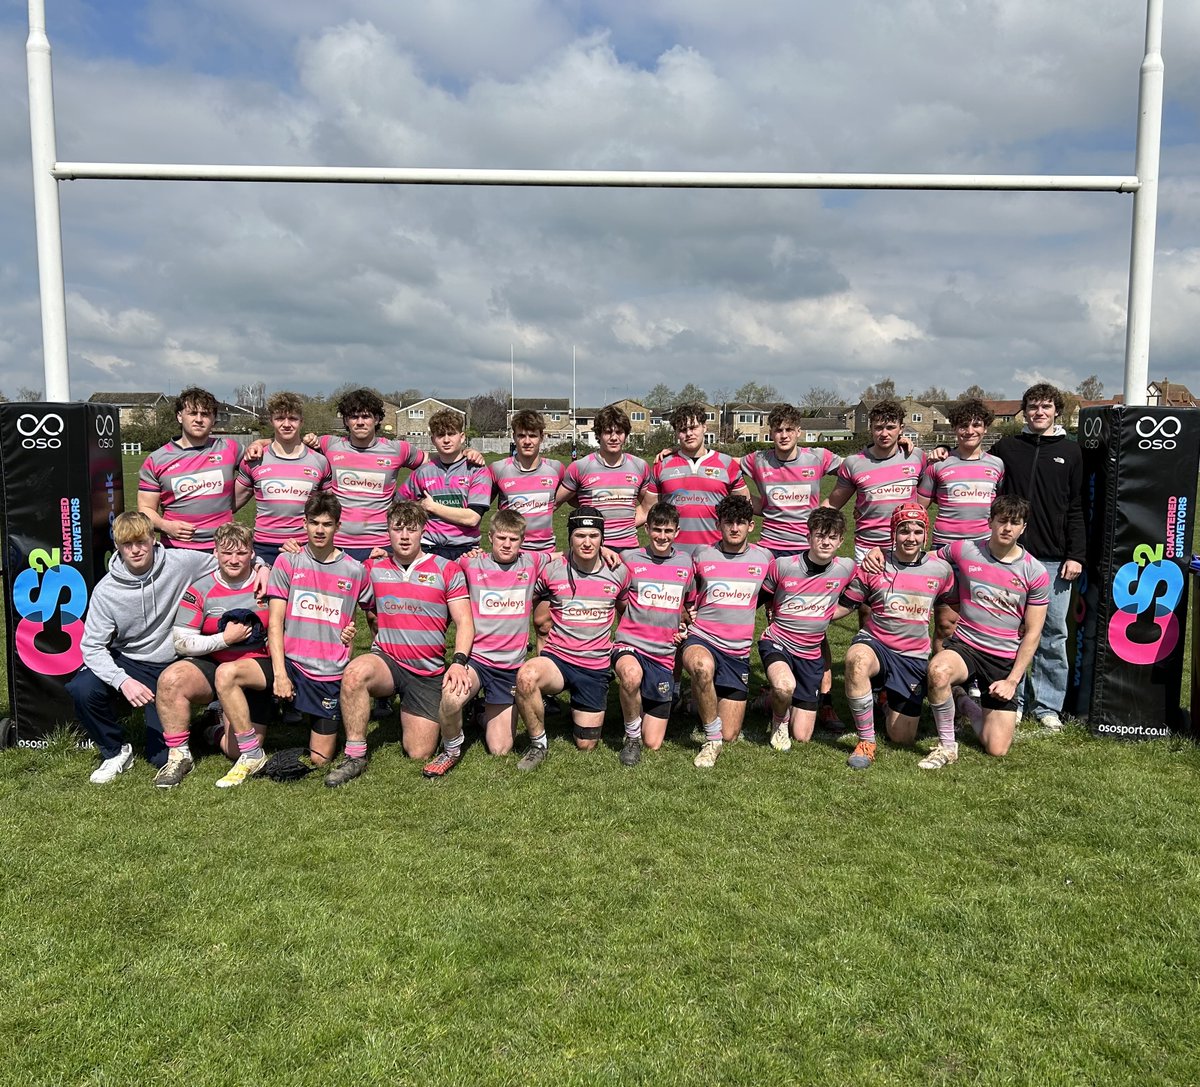 ⭐Save the Date - 6th May!⭐ 

Our sponsees, @olneyrfc, are in the National Colts Cup Final in Worcester. C'MON Colts! Supporting you all the way👏

For more info 👉 ow.ly/sAwu50NMAx1 

#rugby #theolneyway #support